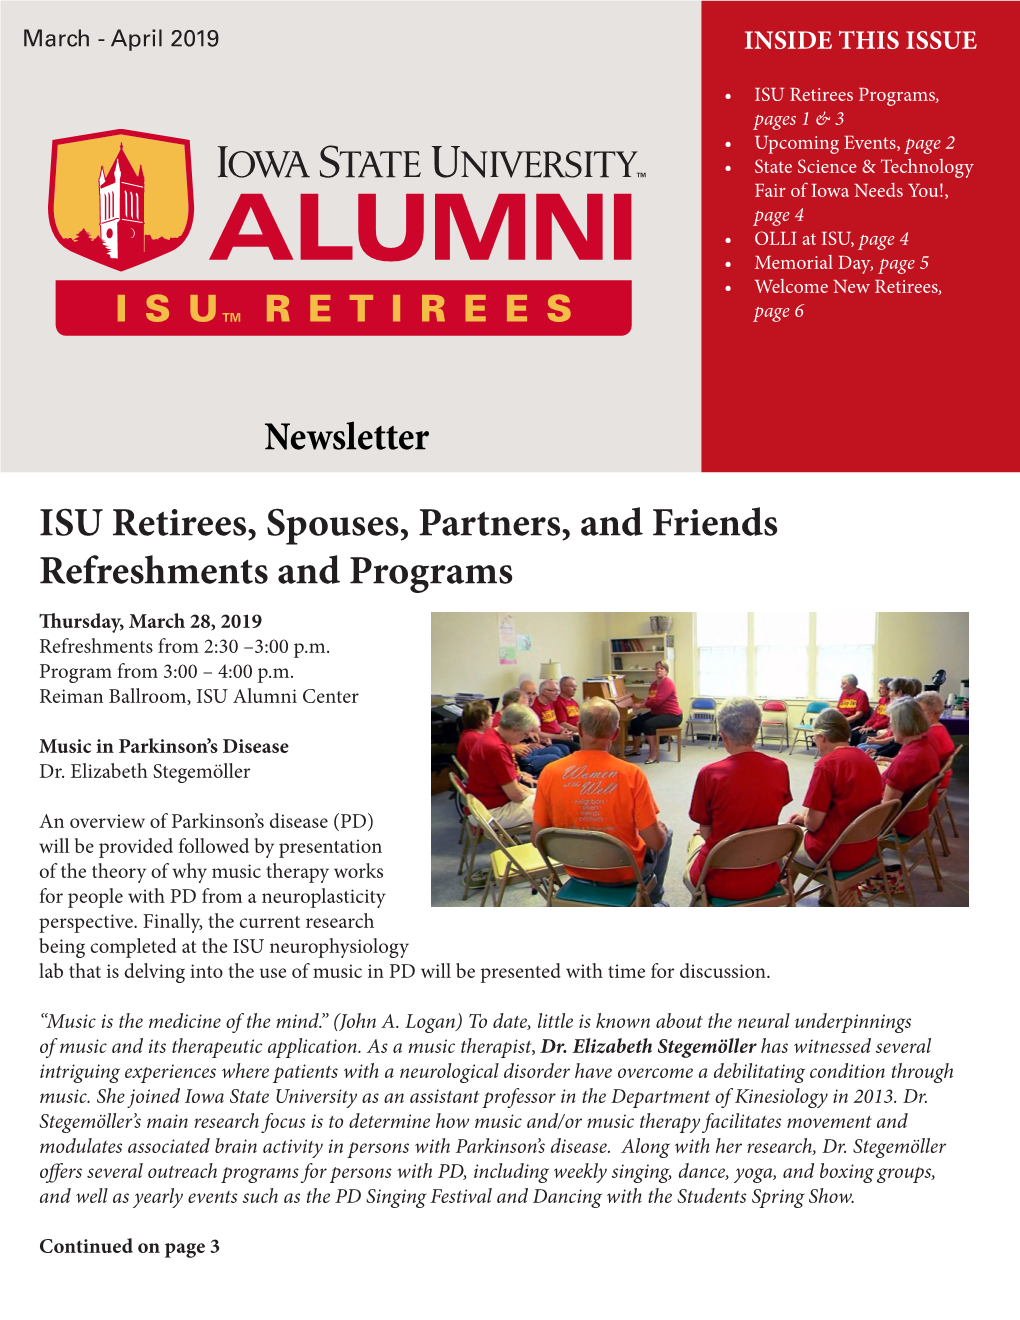 Newsletter ISU Retirees, Spouses, Partners, and Friends